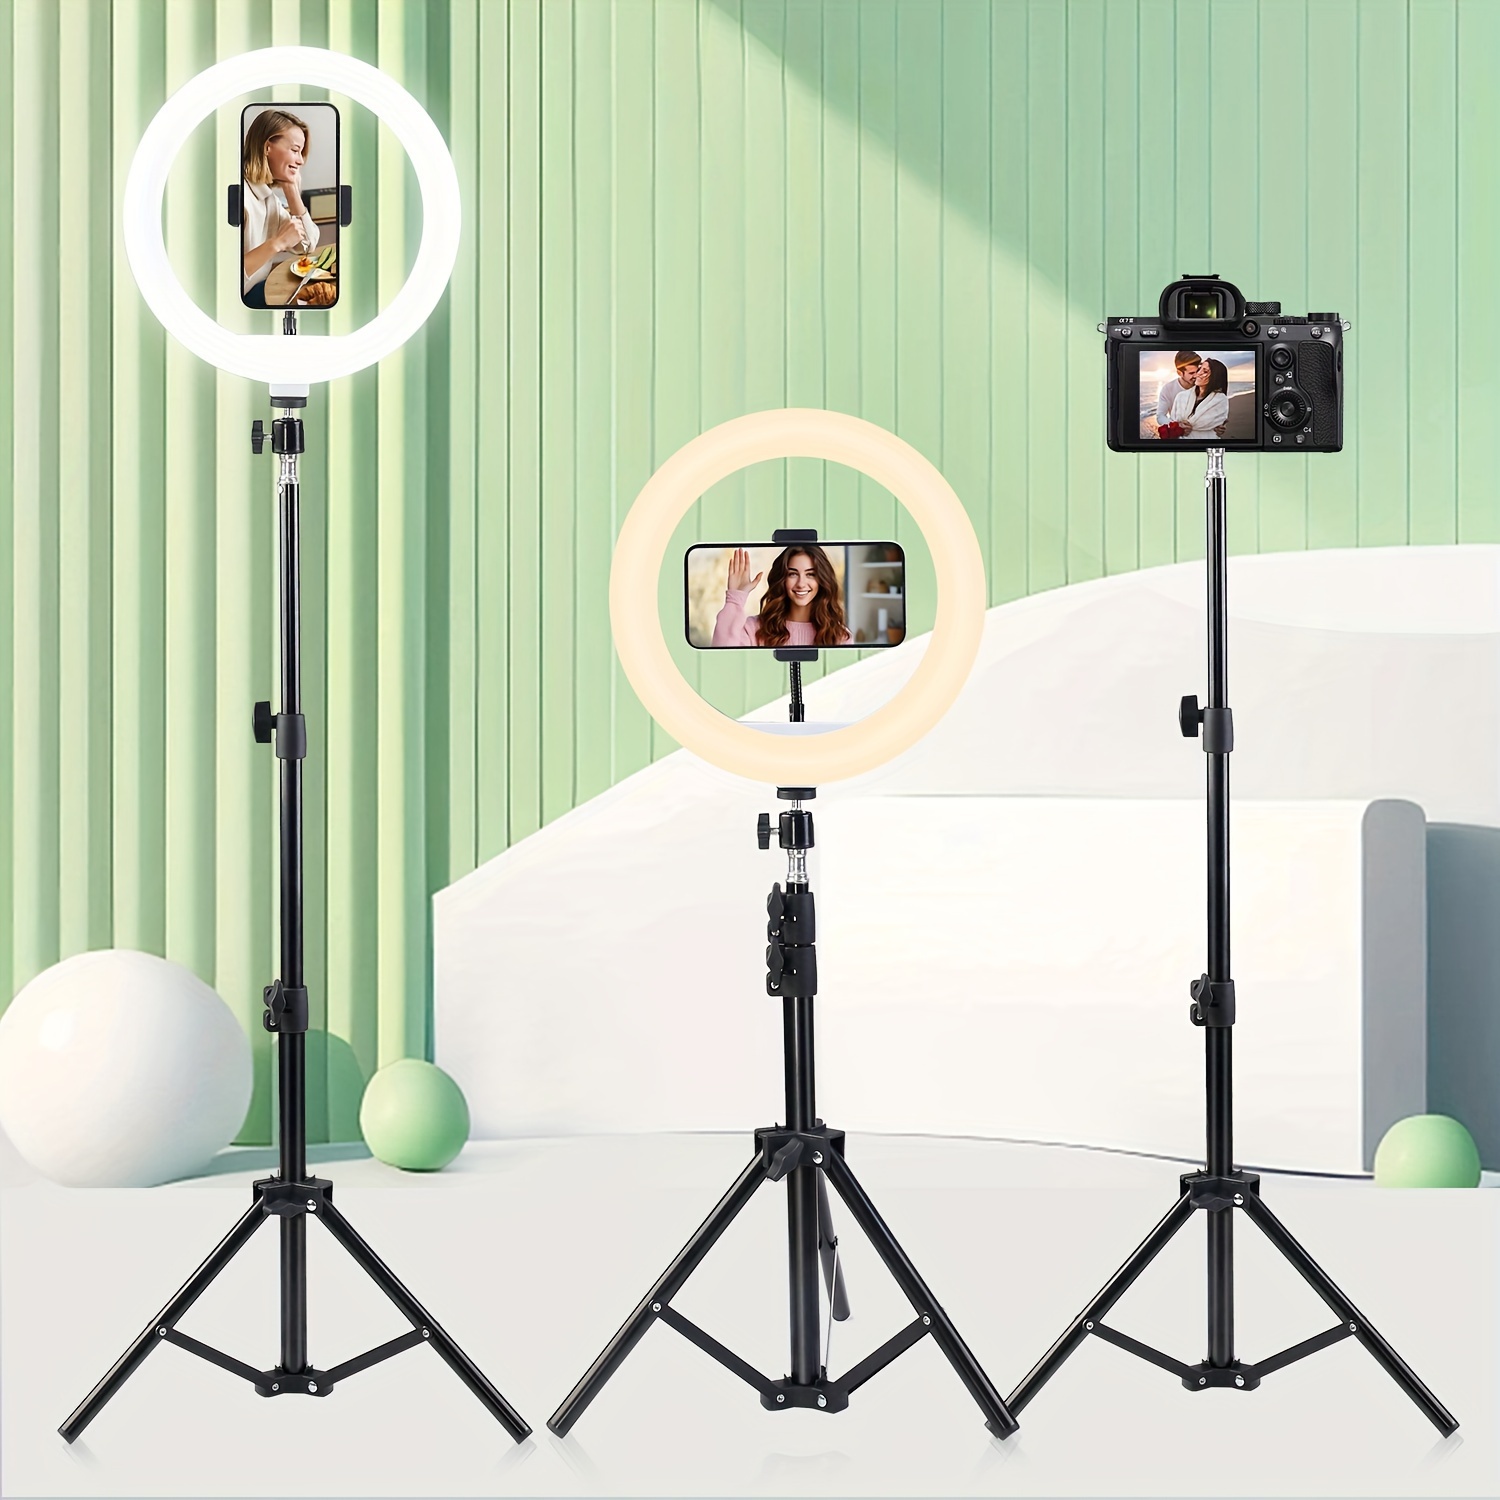 Ring Light 10/26cm Dimmable LED Ringlight With Tripod Stand For